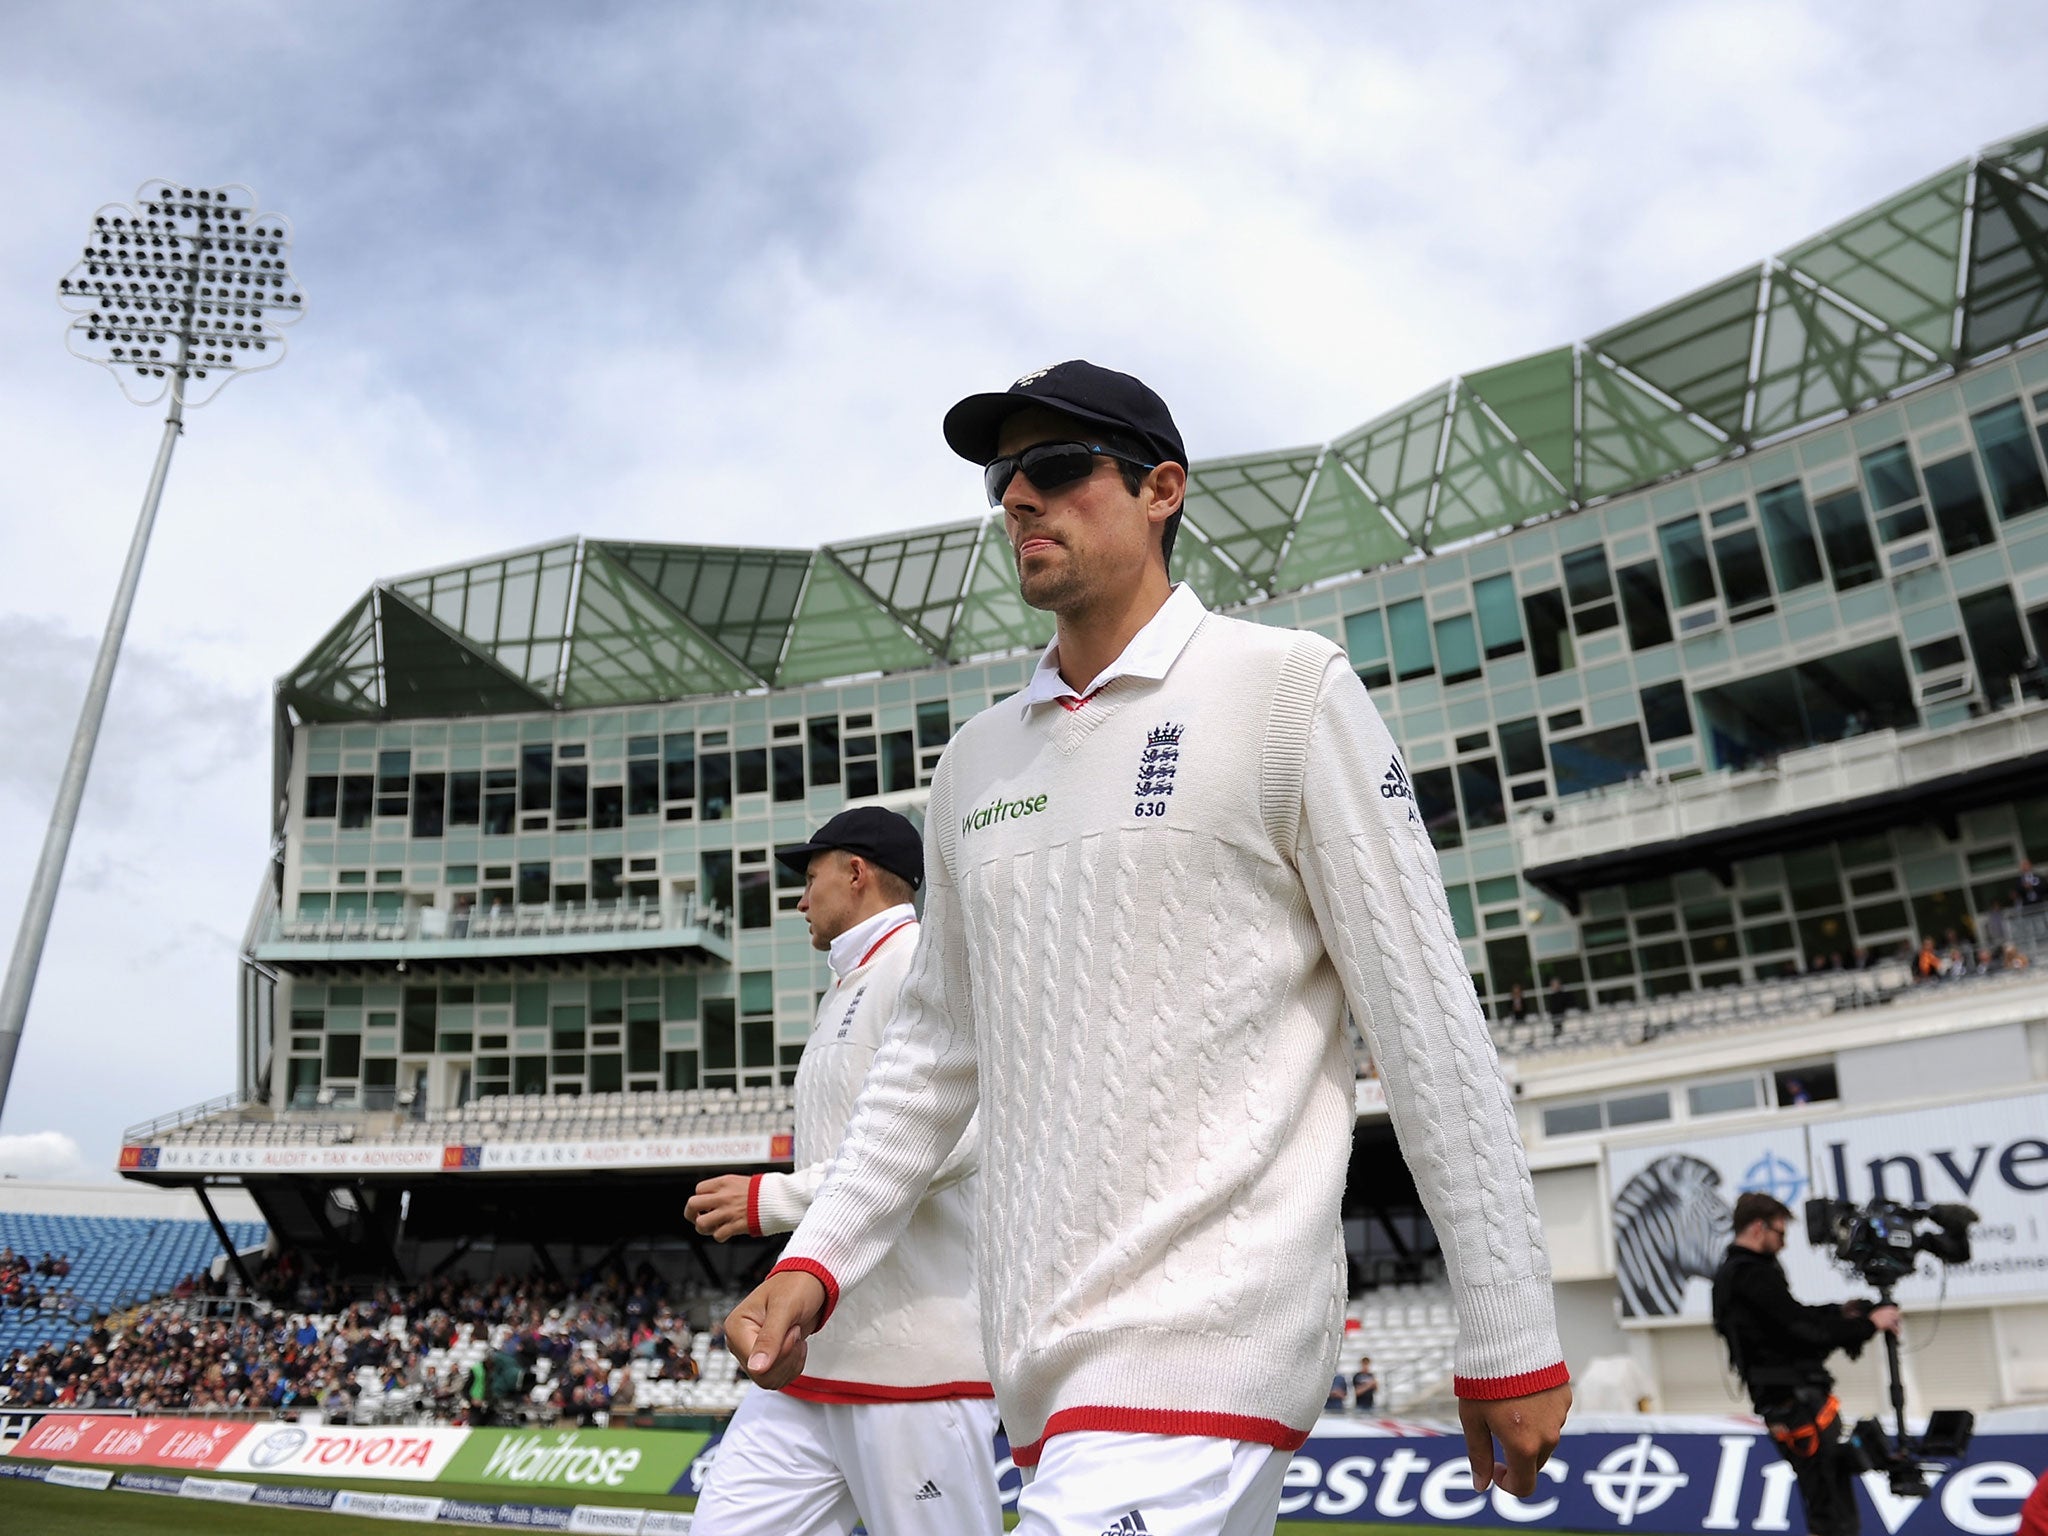 Alastair Cook pictures on the fourth day of the Test